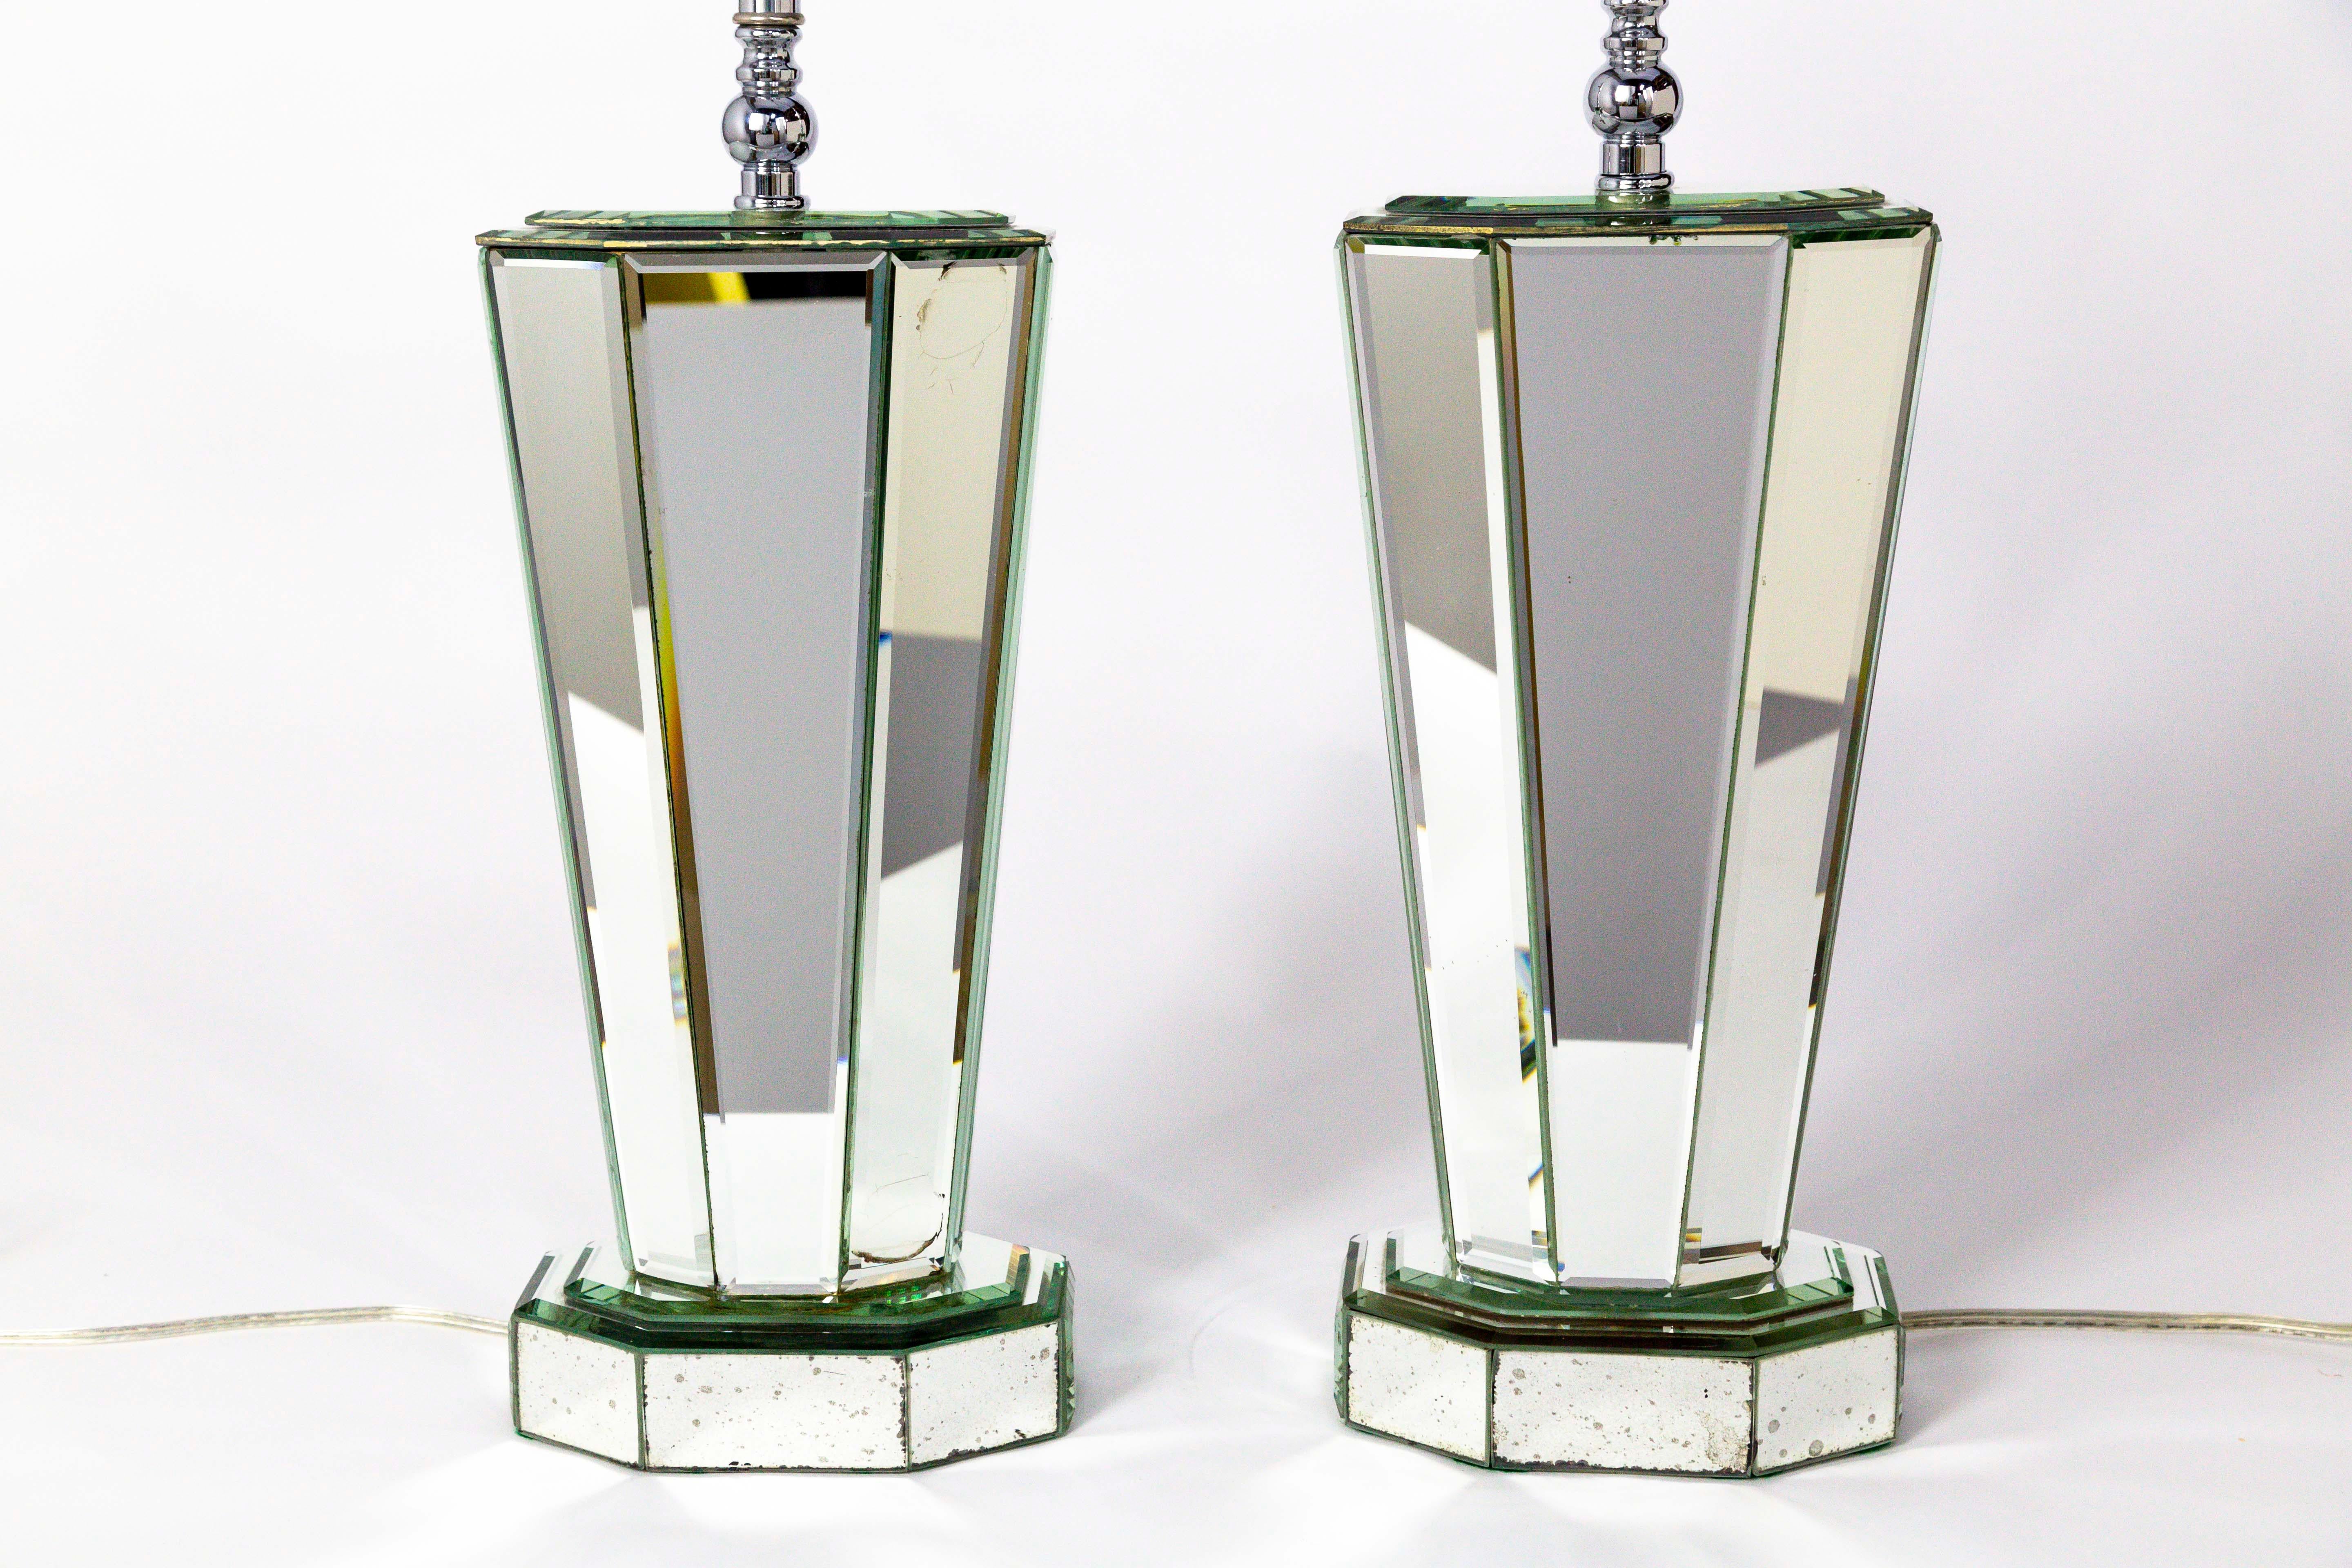 A pair of striking, modern, beveled mirror table lamps that create beautiful light reflections. A late 1970s, streamlined design; faceted, narrow, 8-sided, column-esque shape that tapers slightly at the mirror paneled base. Topped with large, Deco